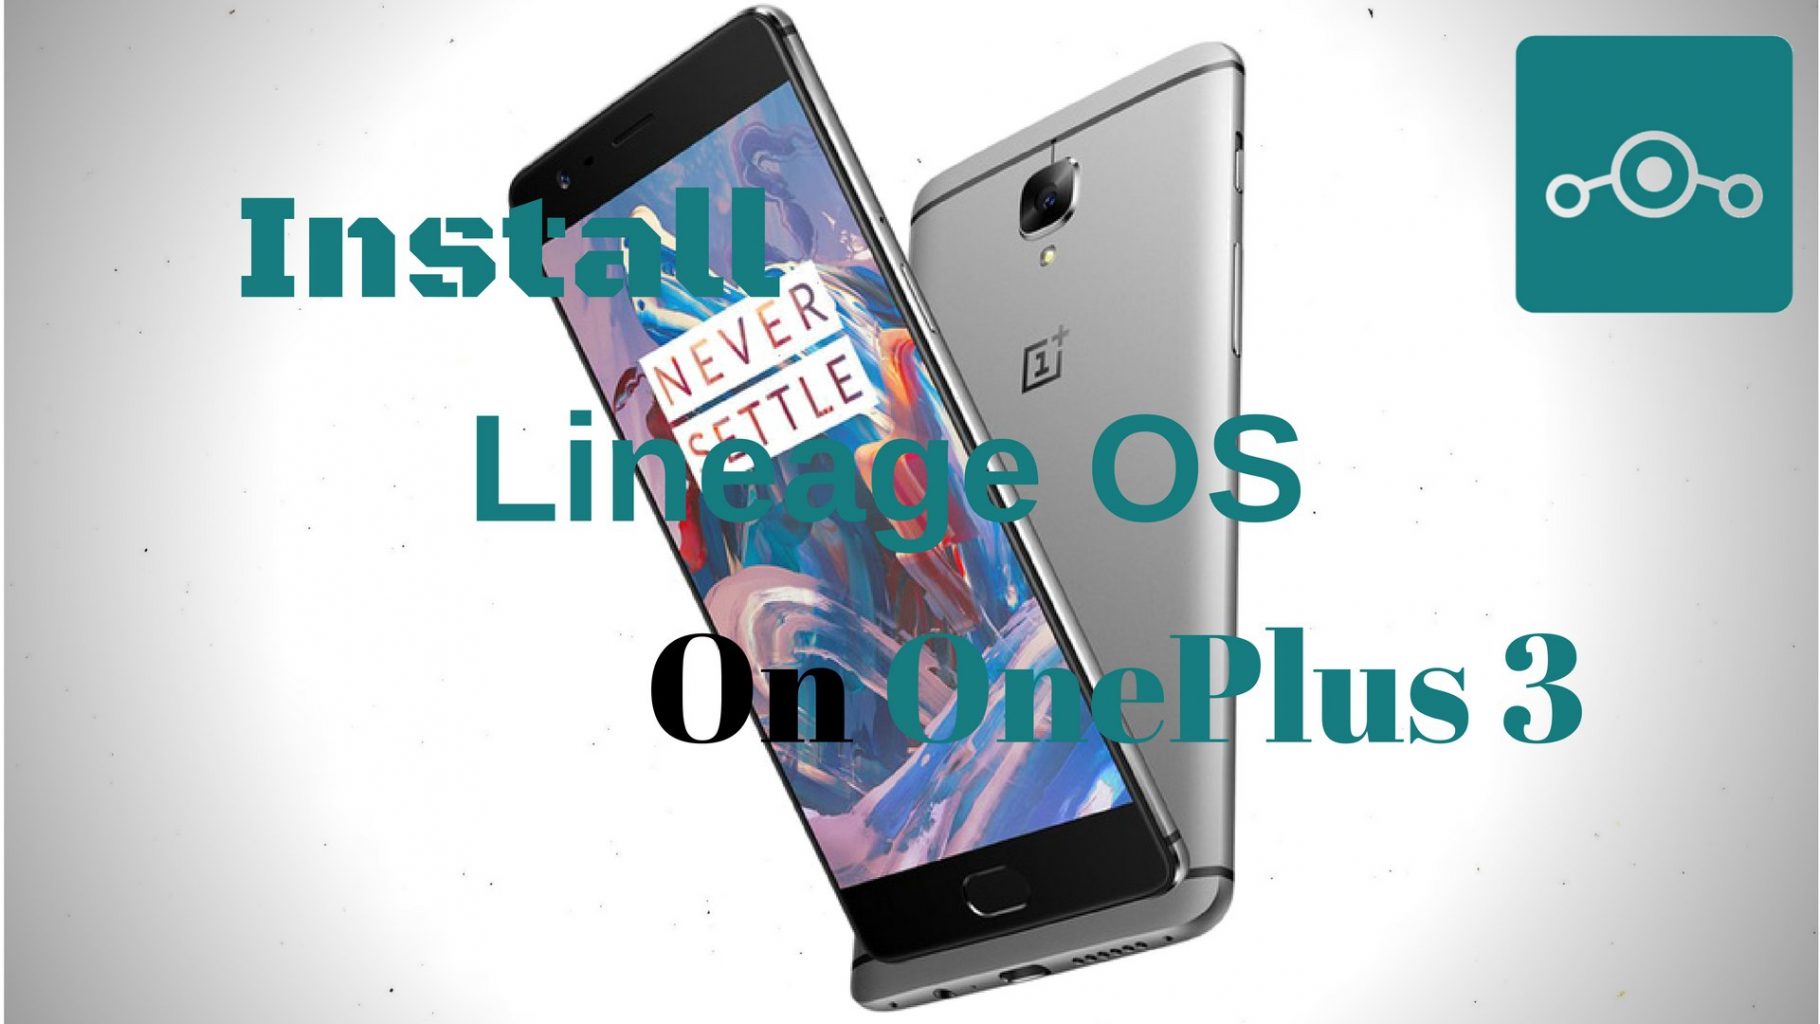 Lineage OS on OnePlus 3